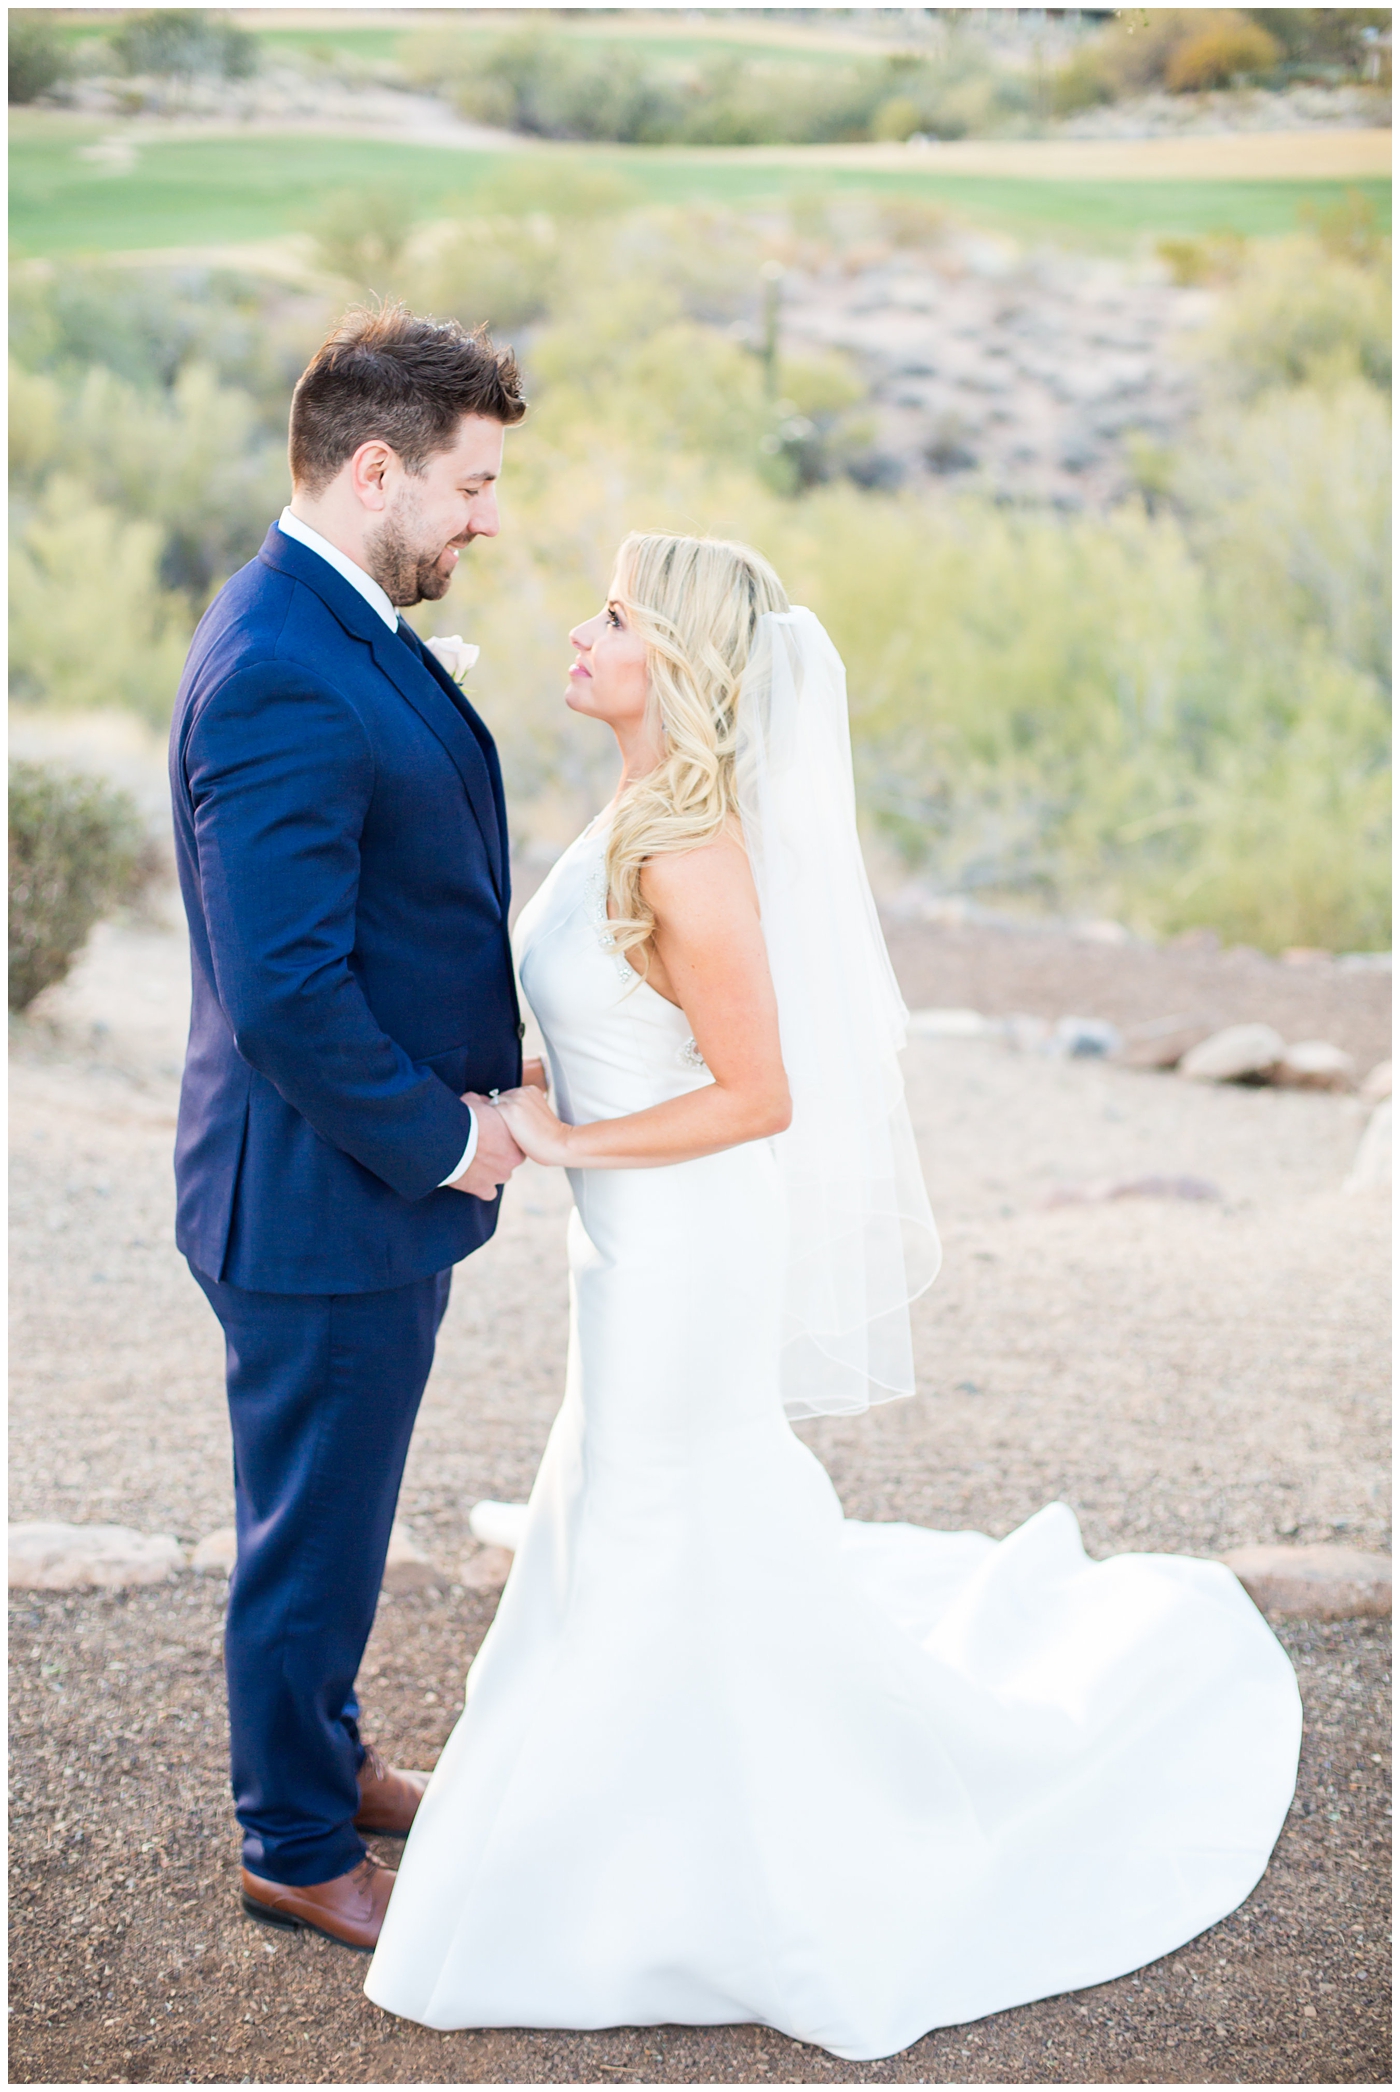 gorgeous bride with side swept hair in racerback pronovias dress and blush pink, white rose and eucalyptus greenery wedding bouquet with groom in navy suit and tie couple portrait on wedding day